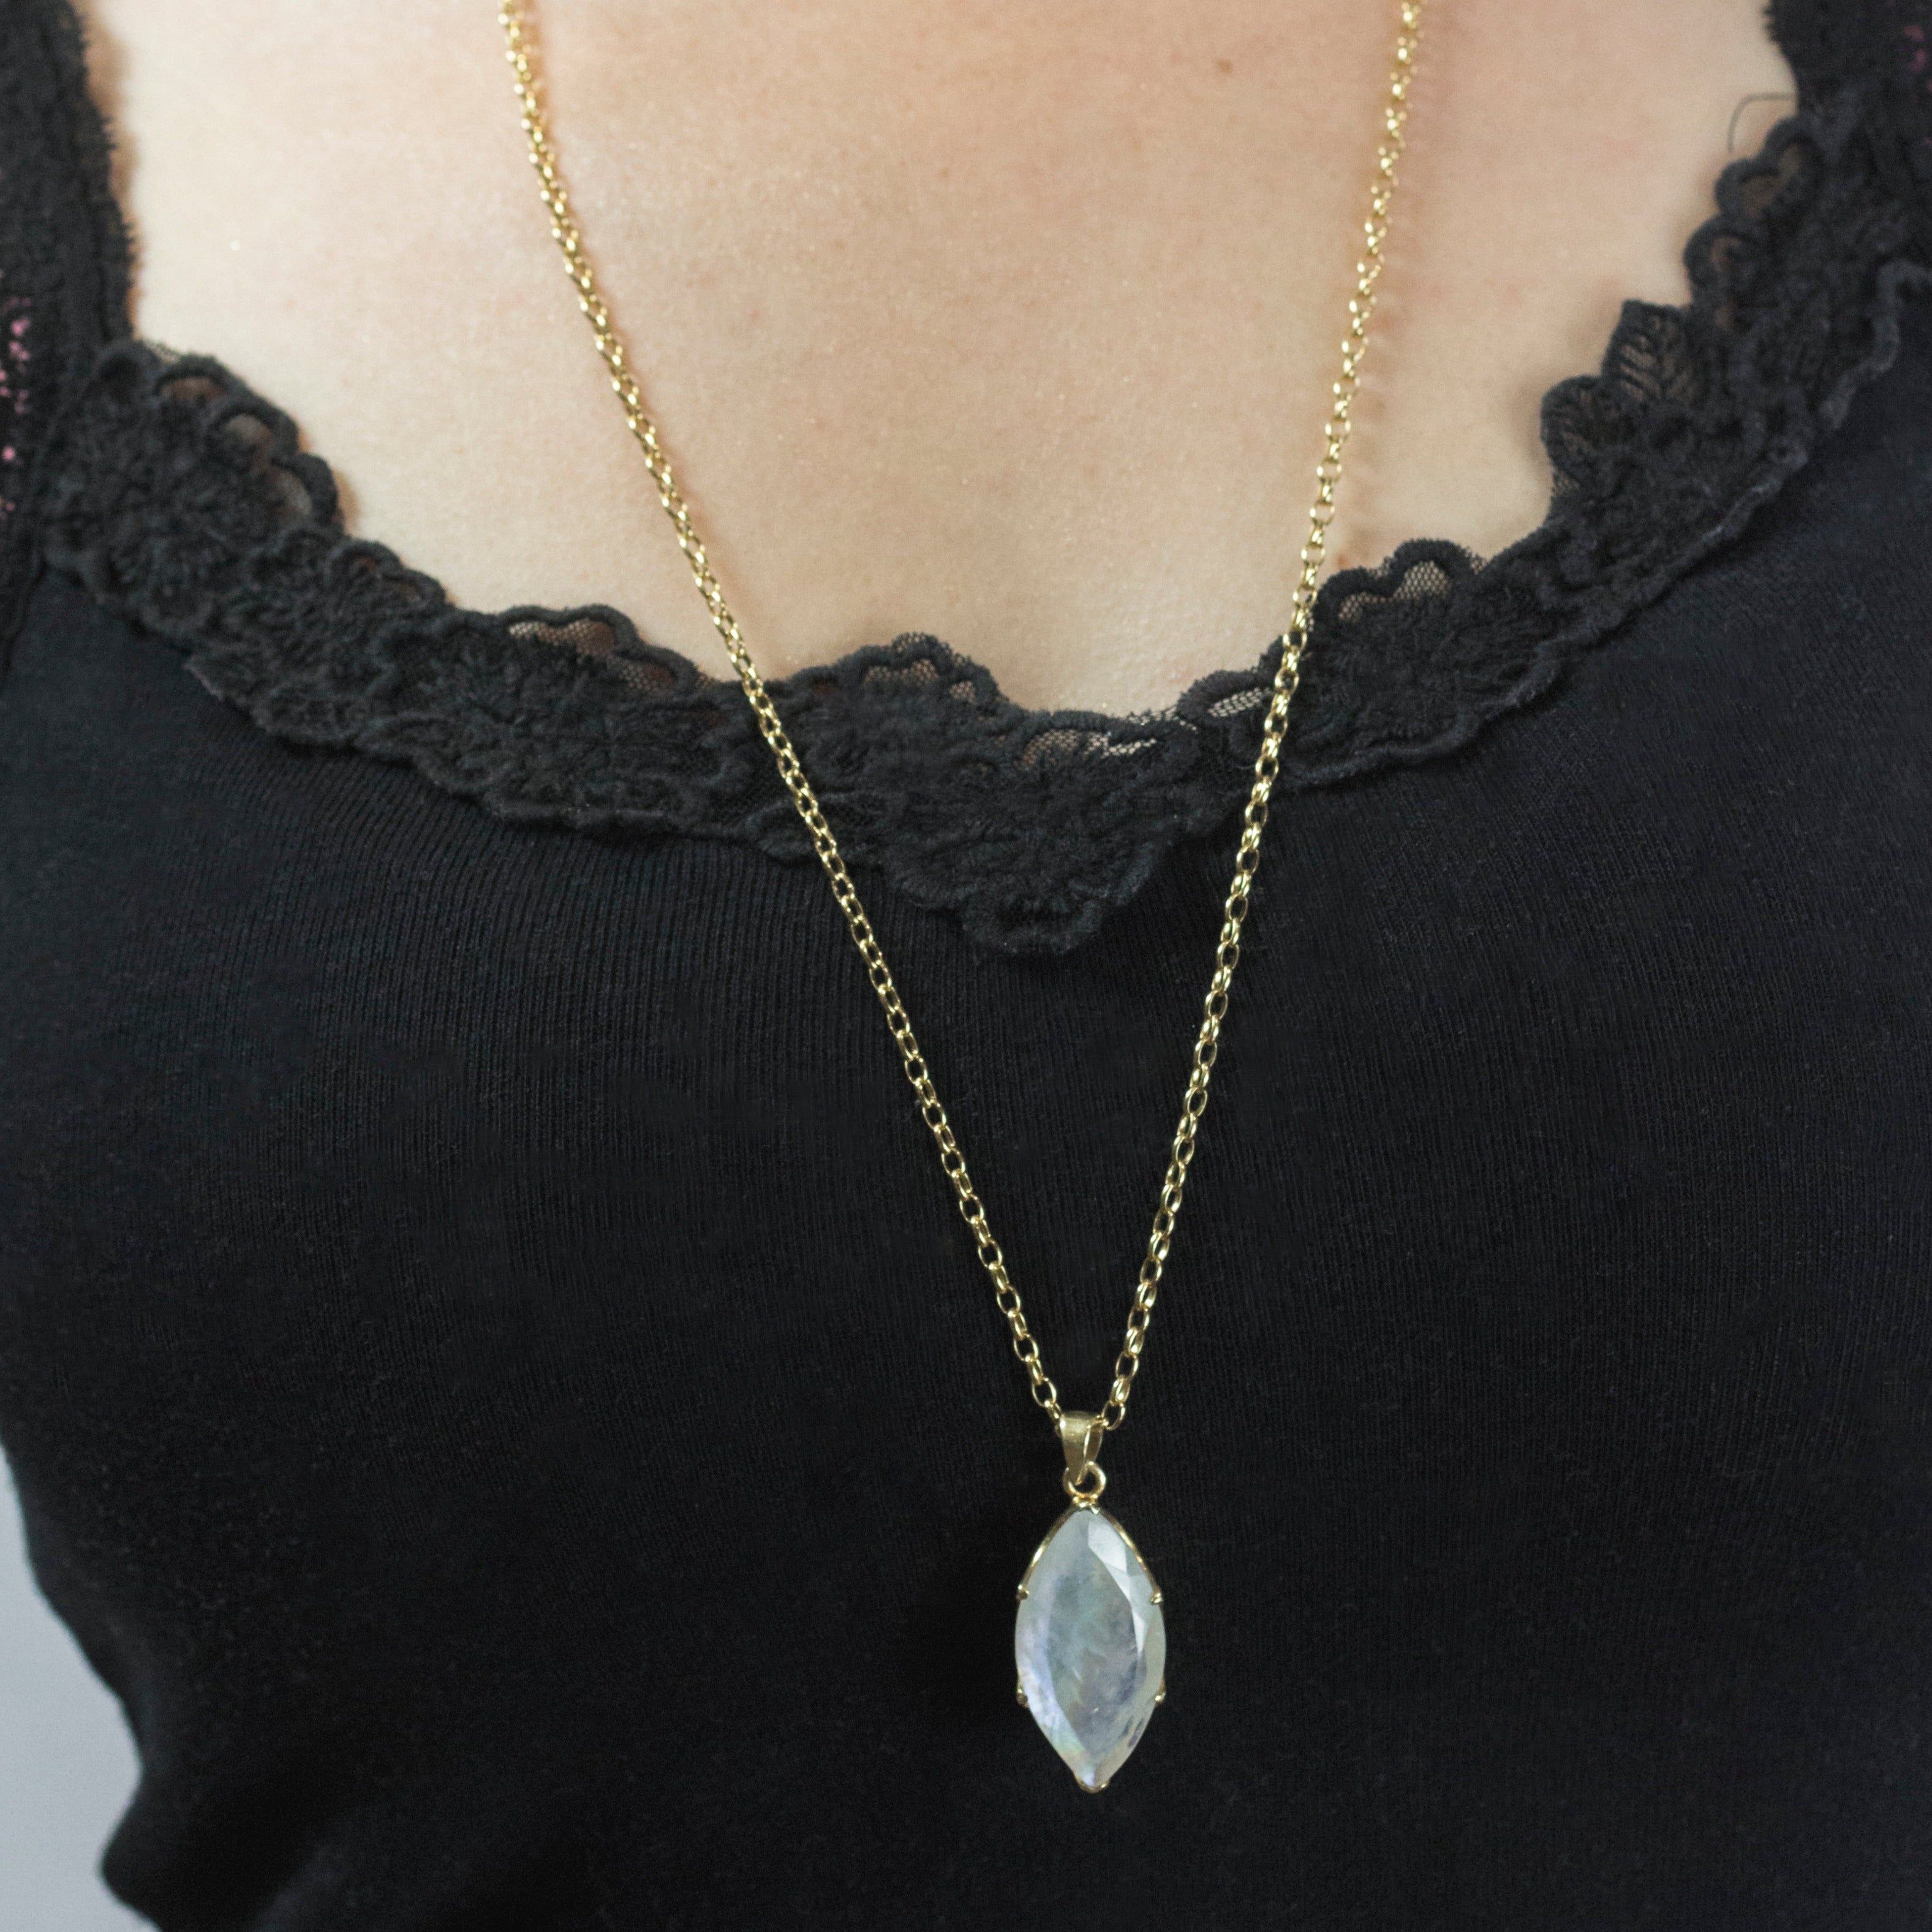 Faceted Marquis Rainbow Moonstone Necklace on model